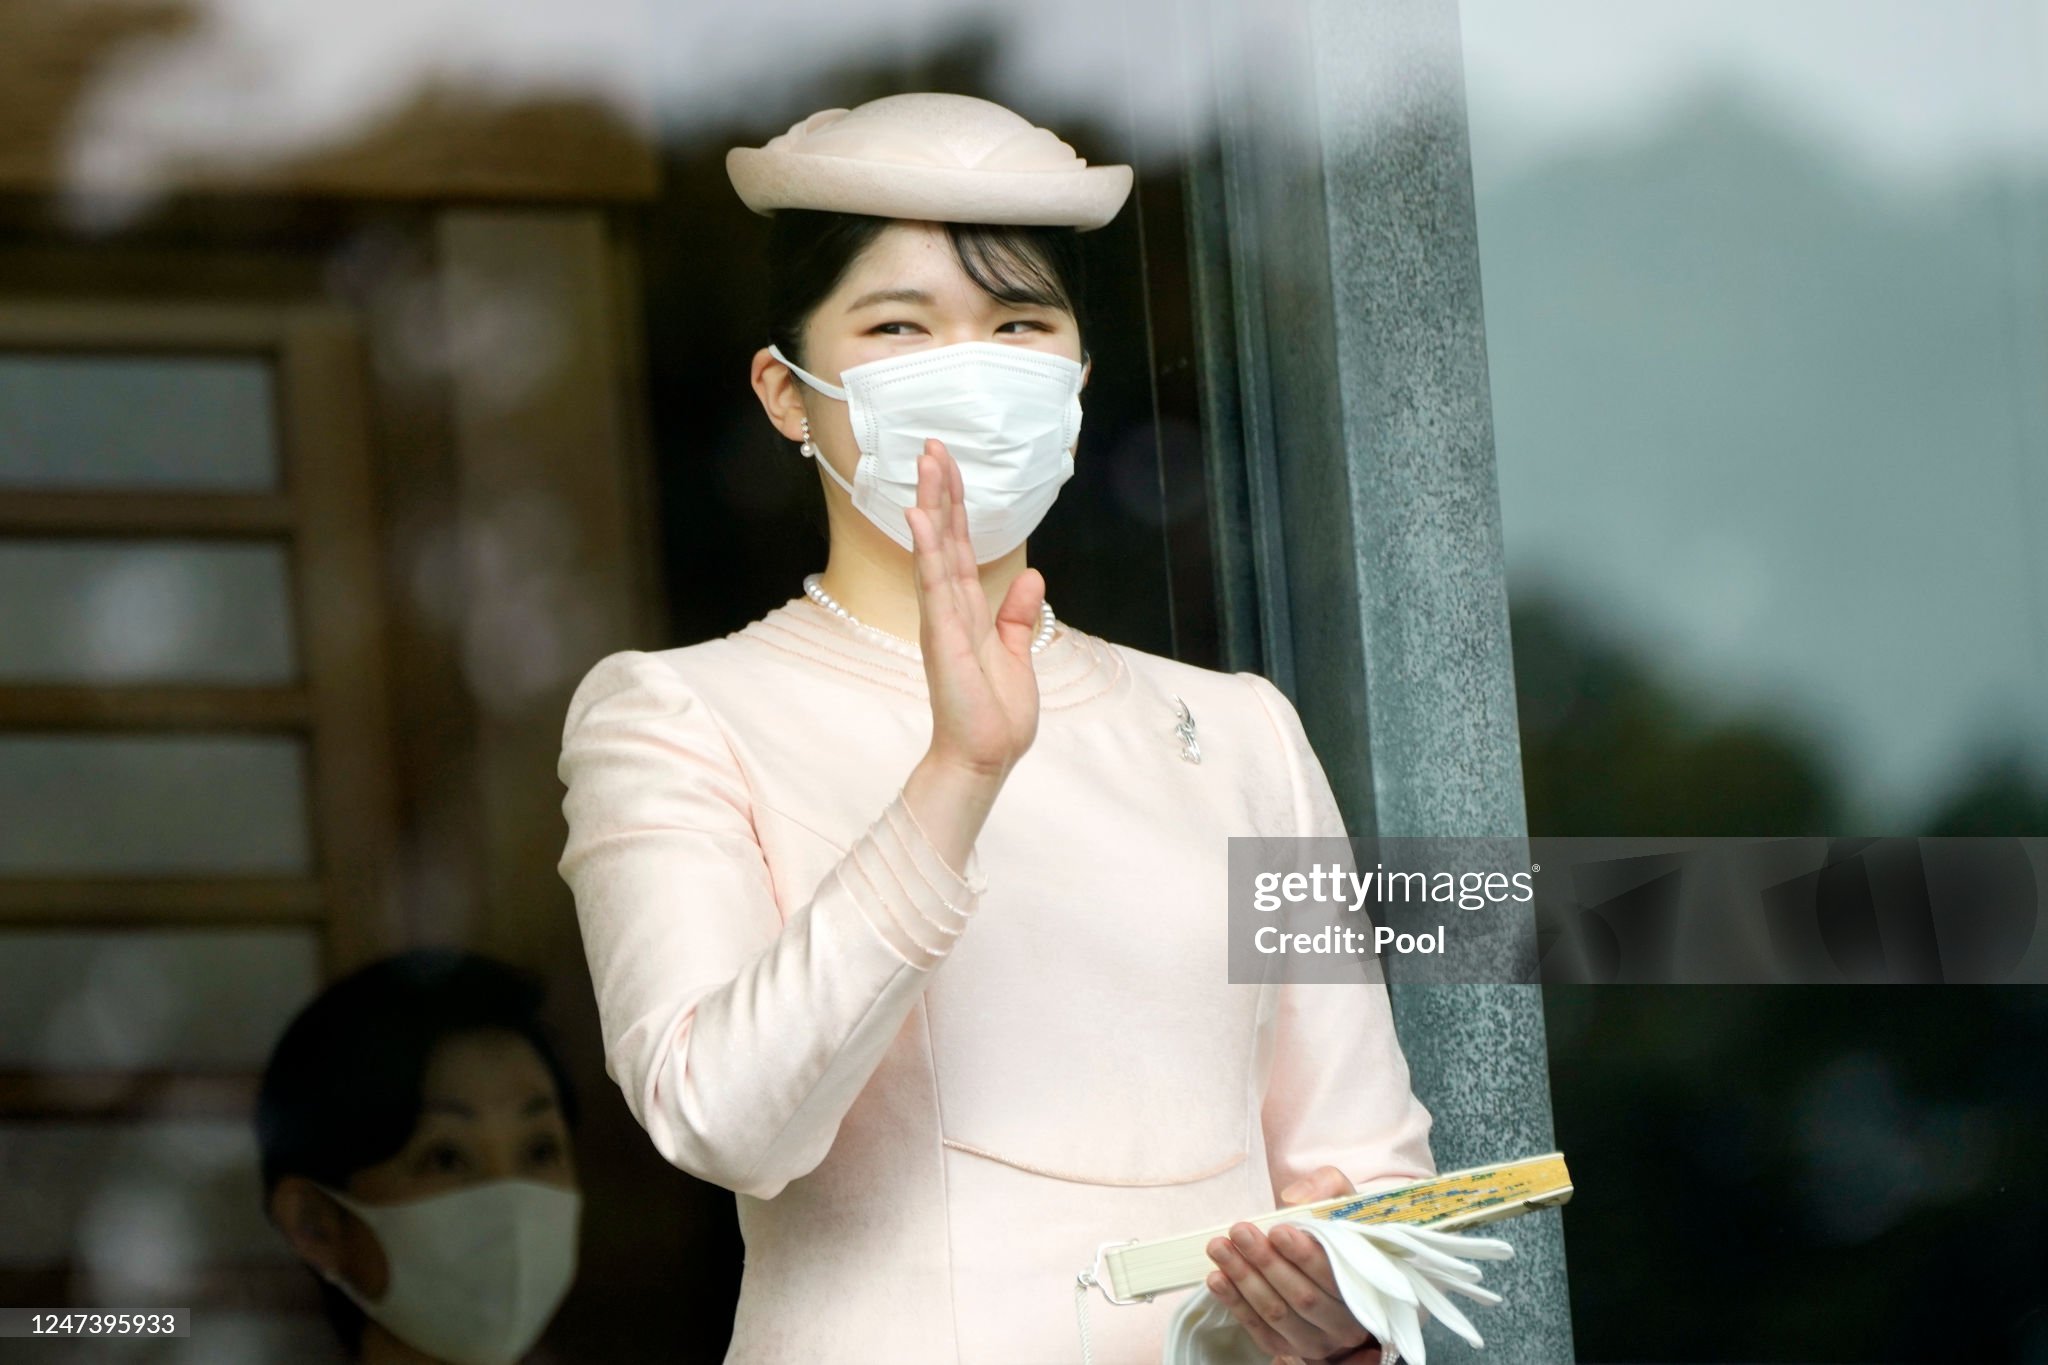 princess-aiko-japans-emperor-naruhito-greets-well-wishers-as-she-appears-on-the-balcony-of-the.jpg